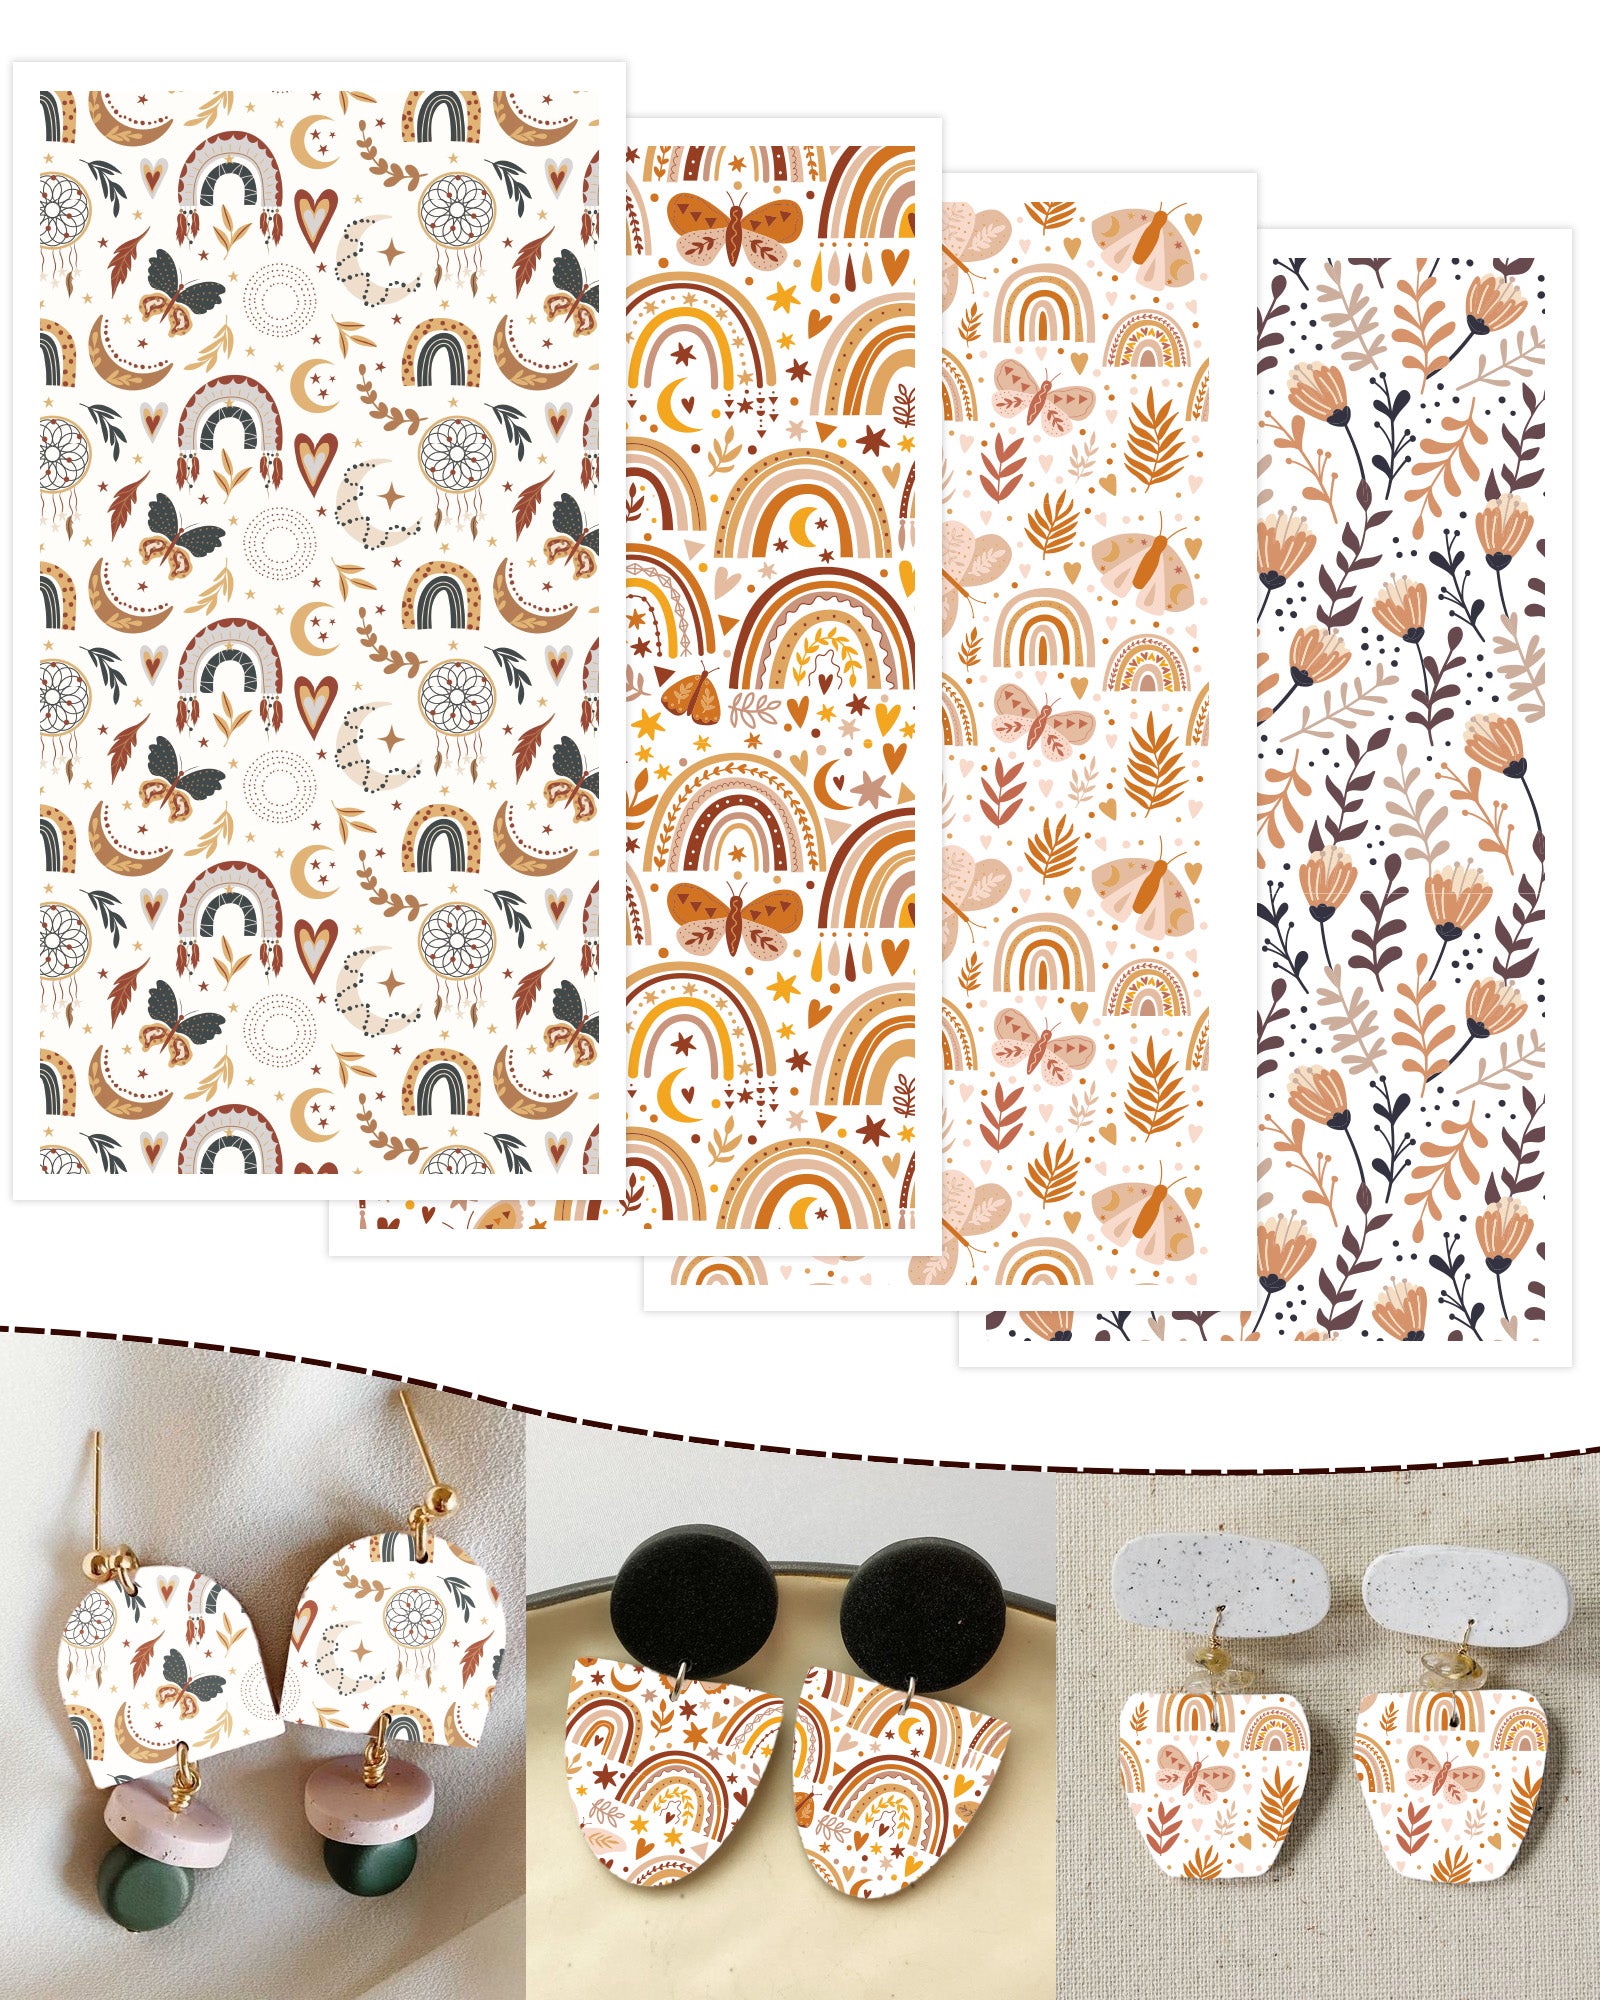 Puocaon Boho Transfer Paper for Polymer Clay 4 Design 20 Pcs